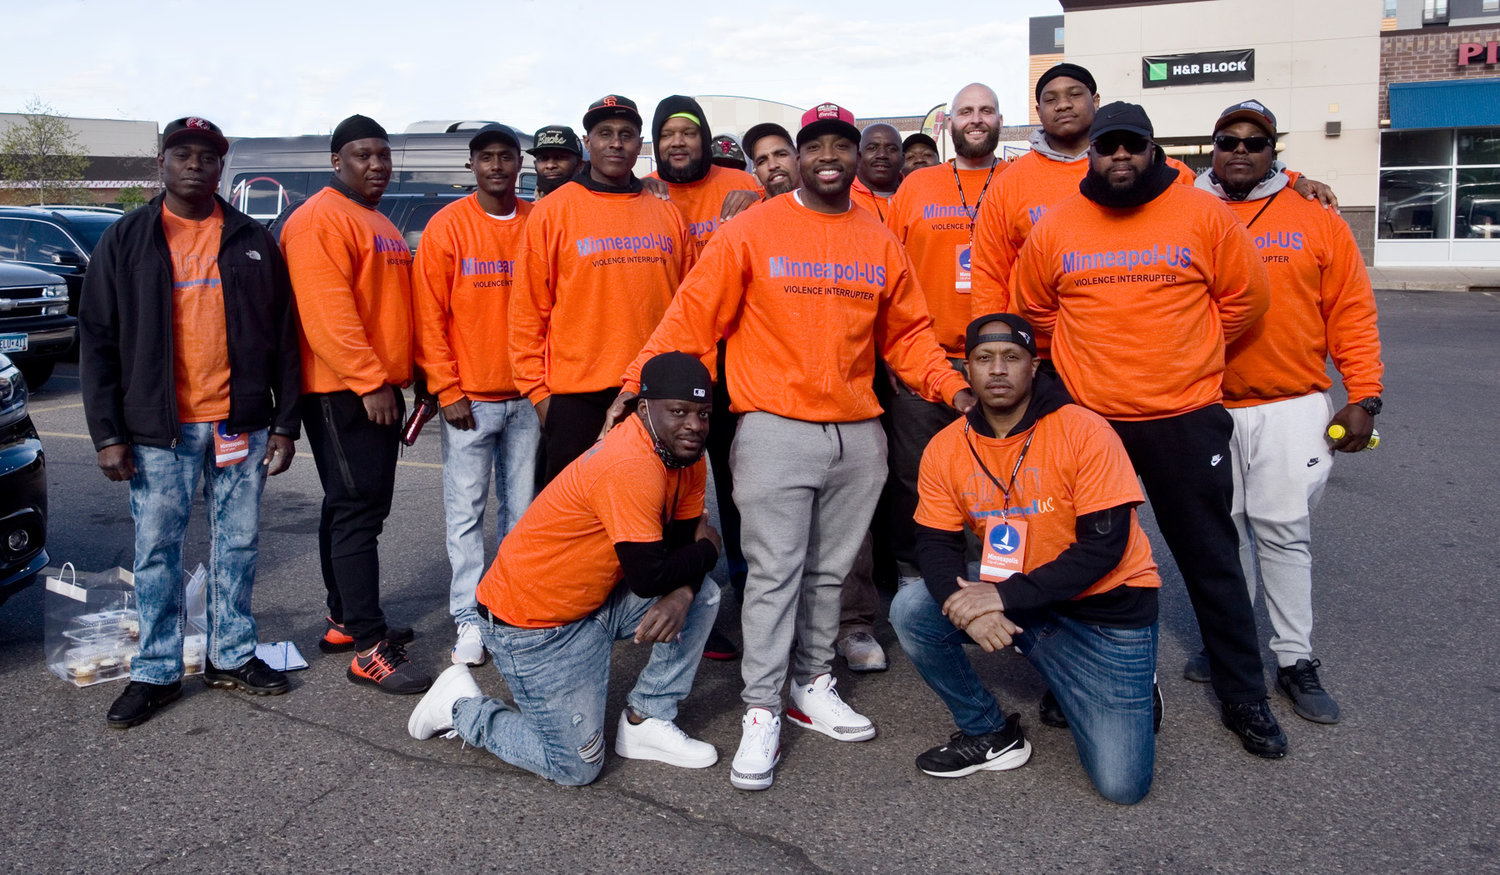 The T.O.U.C.H Outreach community patrol in the Aldi parking lot before heading out for the night. Team leader Muhammad Abdul-Ahad is pictured standing center. (Photo by Margie O’Loughlin)